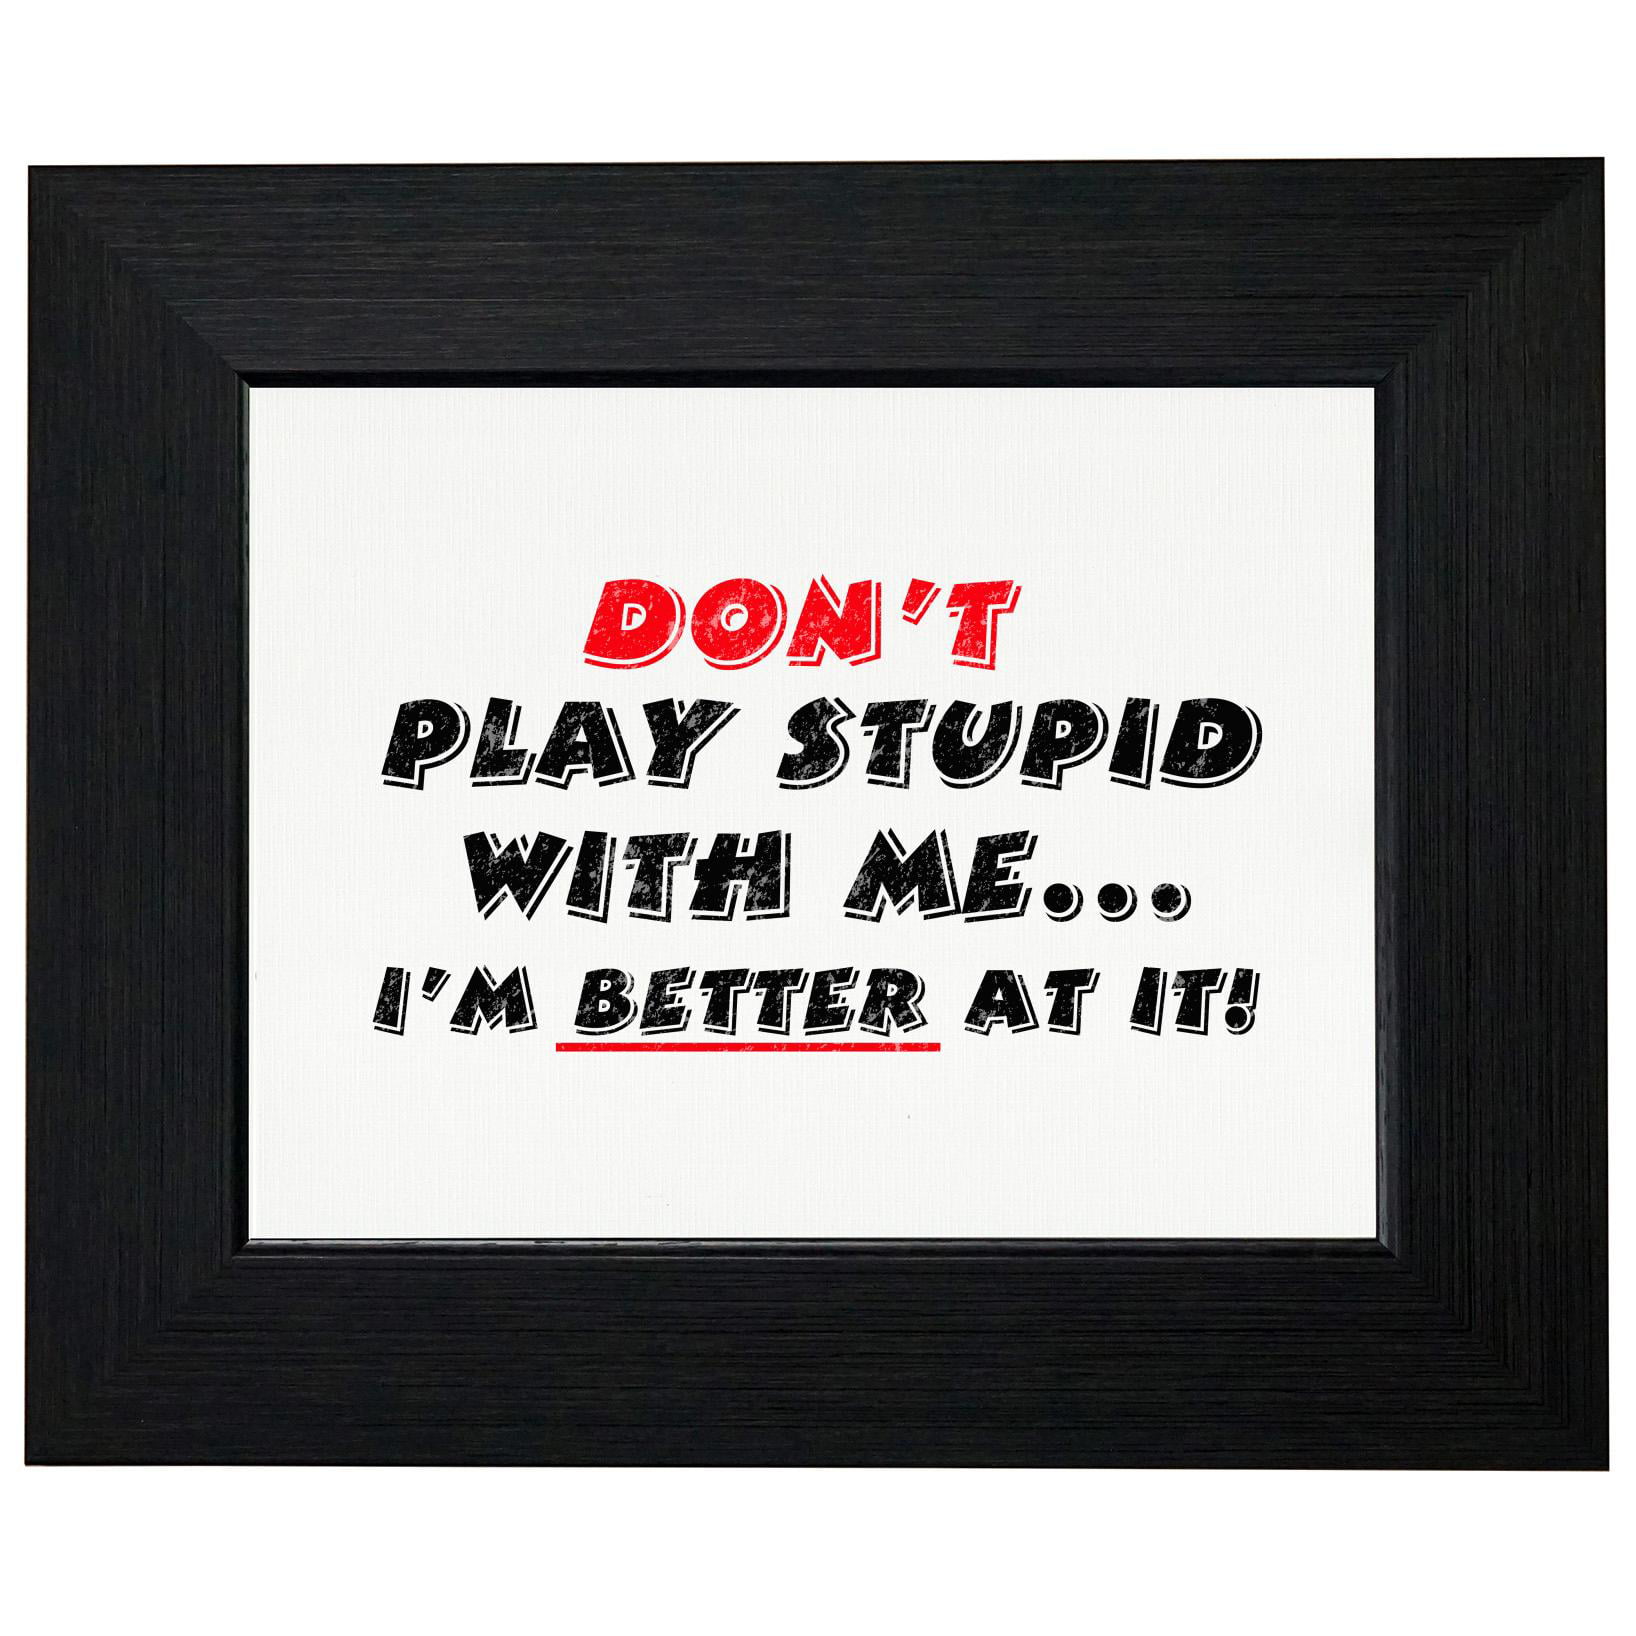 DONT PLAY ME QUOTES –